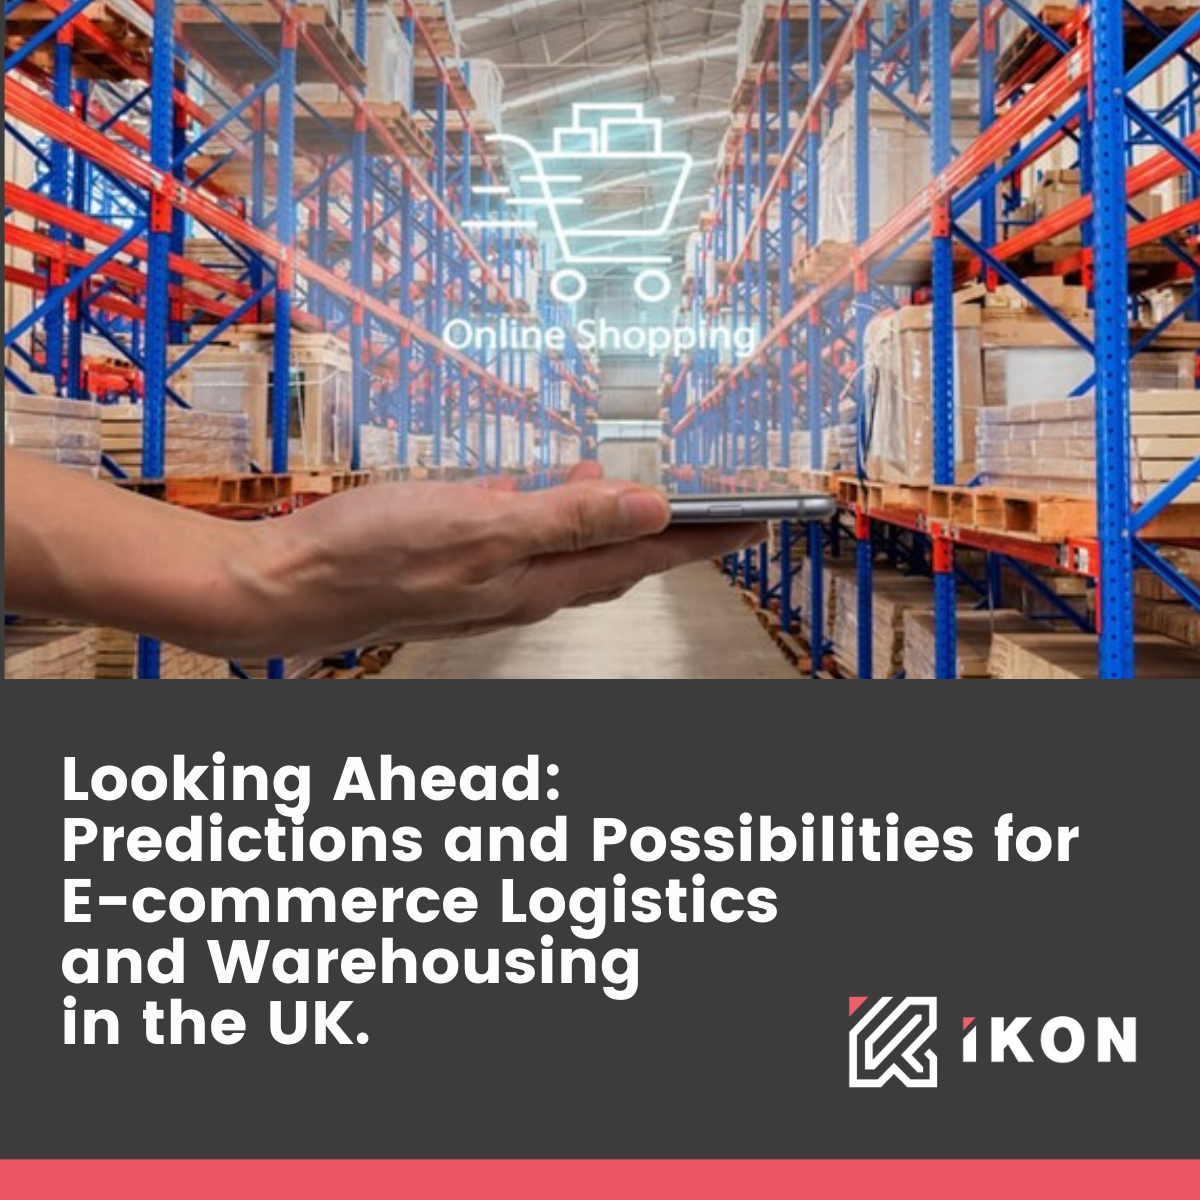 PREDICTIONS AND POSSIBILITIES FOR E-COMMERCE LOGISTICS AND WAREHOUSING IN THE UK